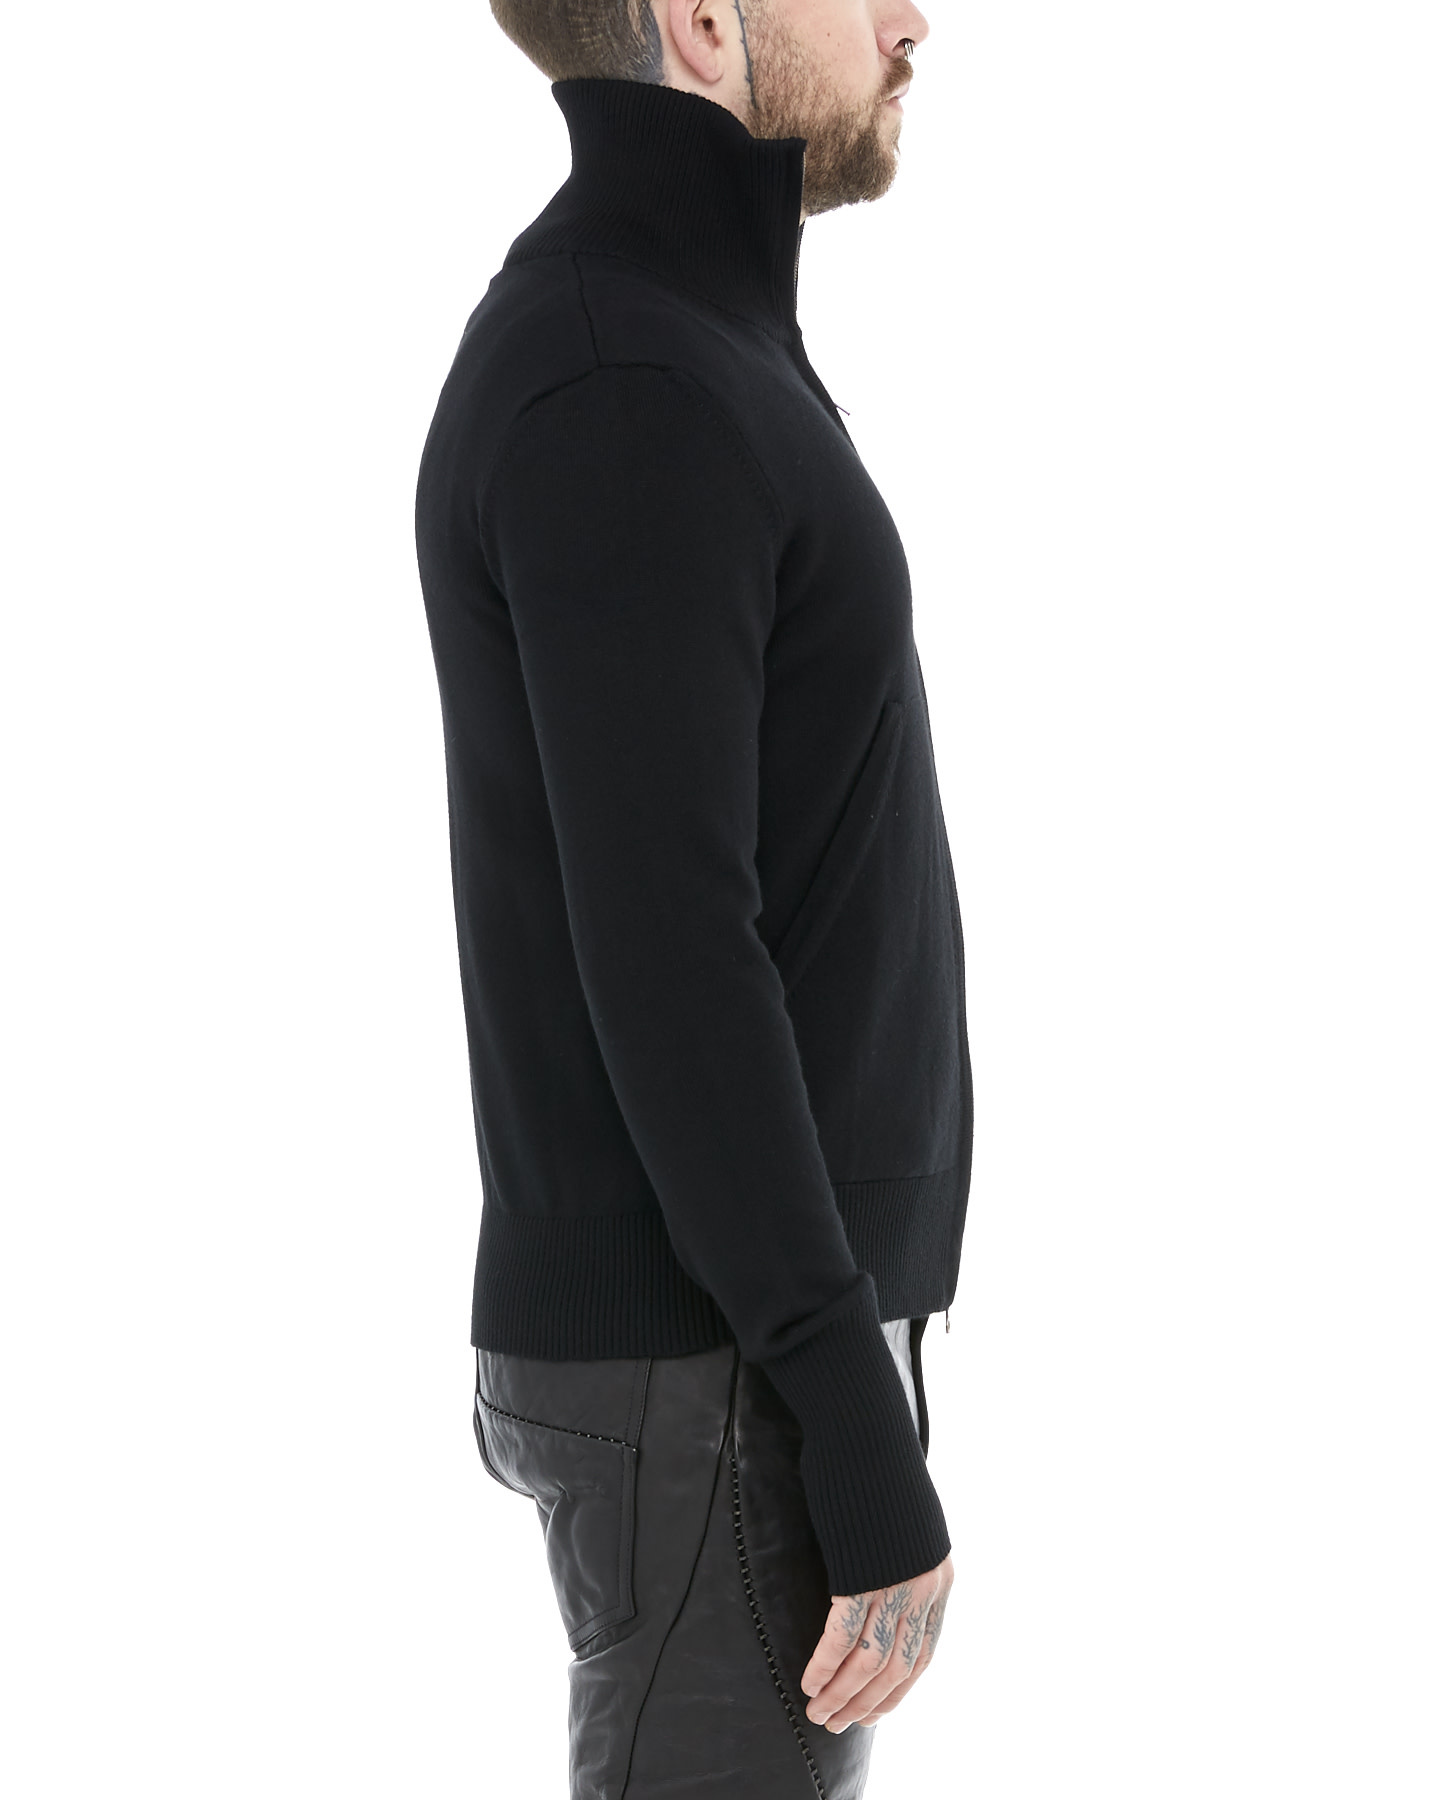 Fitted Wool Zip Knit Jacket by Lars Anderson